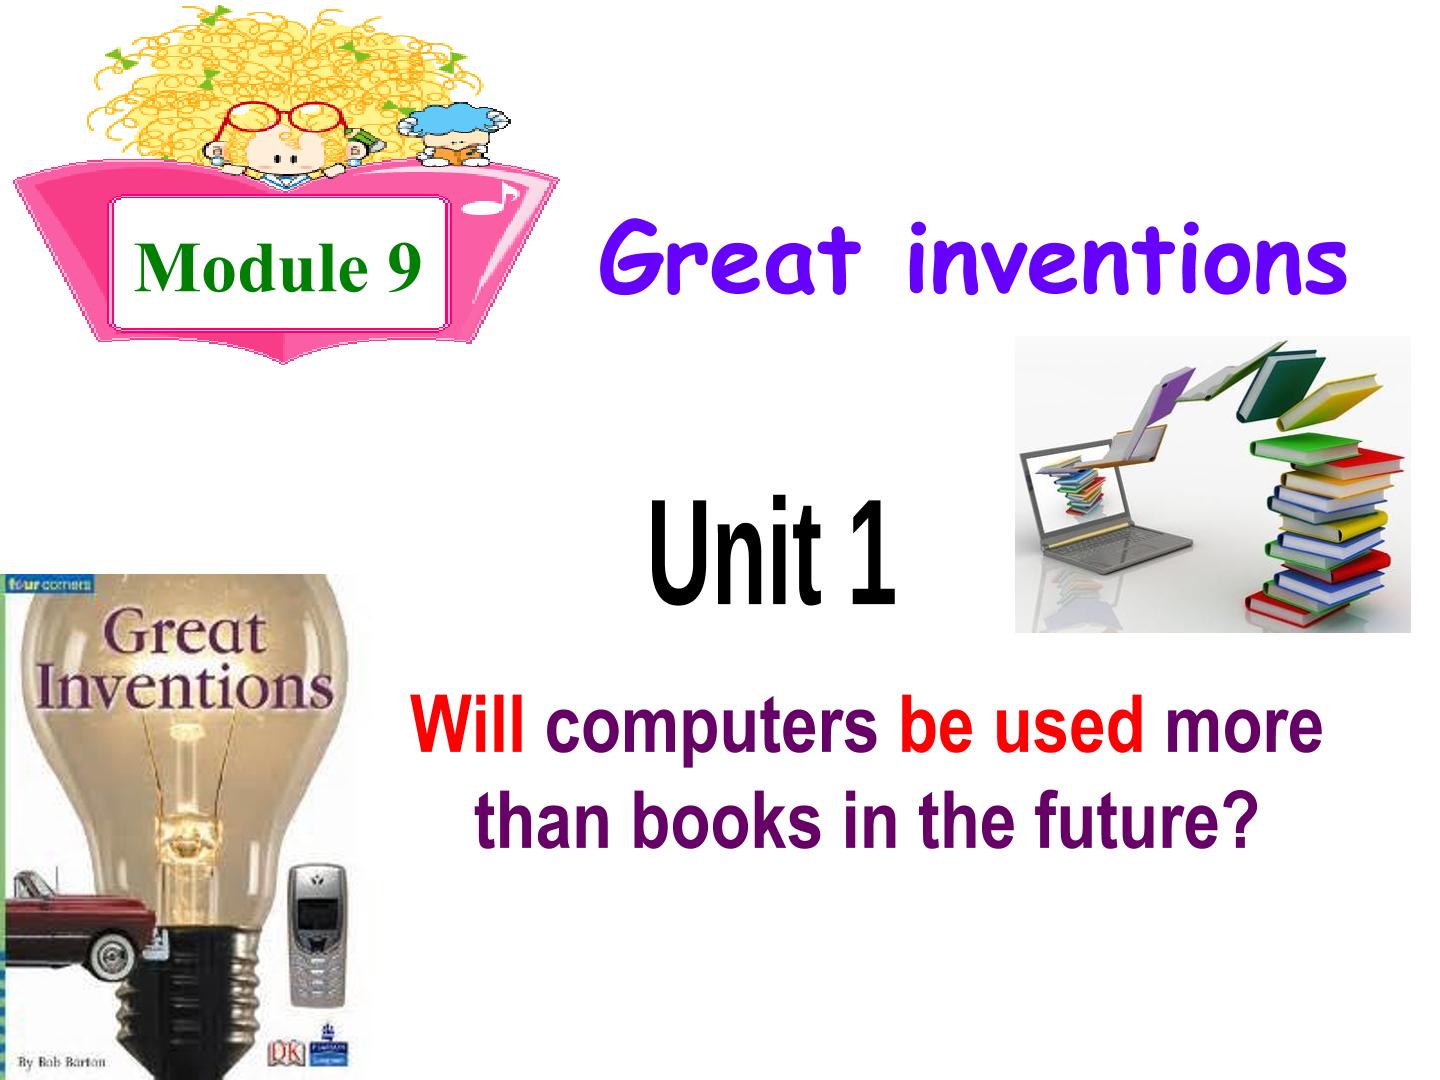 Unit 1 Will computers be used more than books in the future.